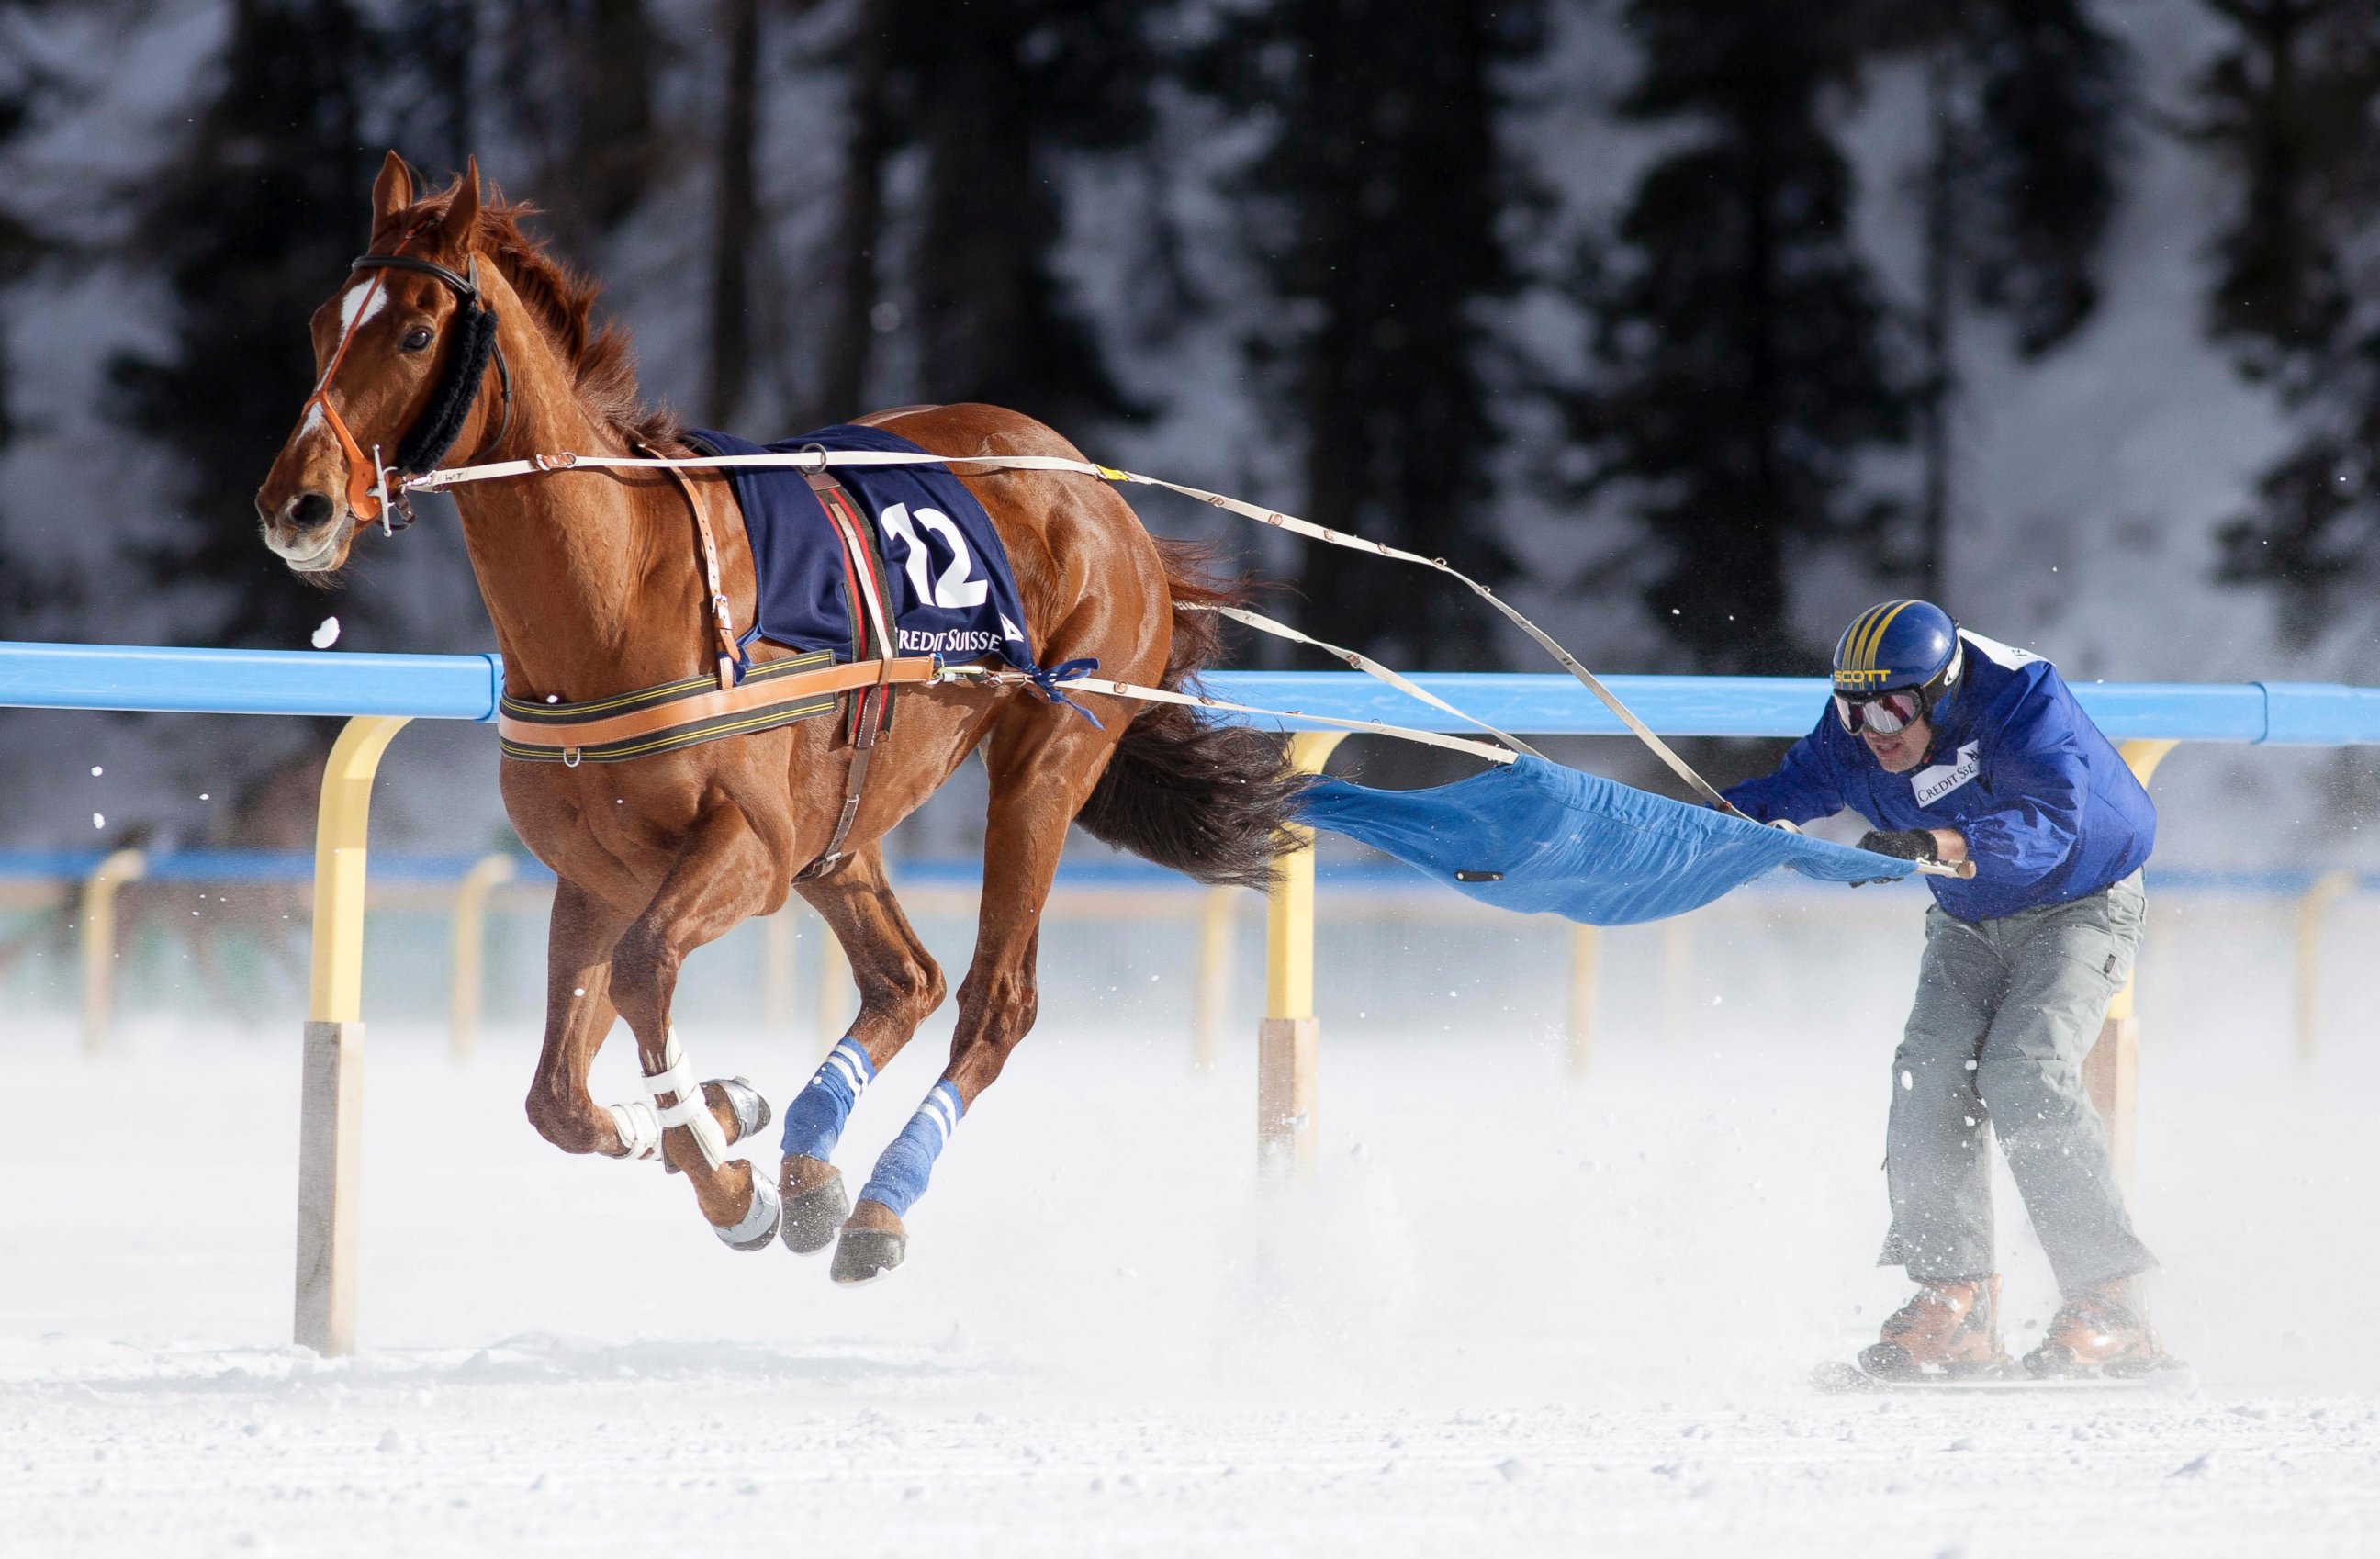 PHOTO: A ski joring racer competes in the White Turf horse racing event in St. Moritz, Feb. 3, 2013.